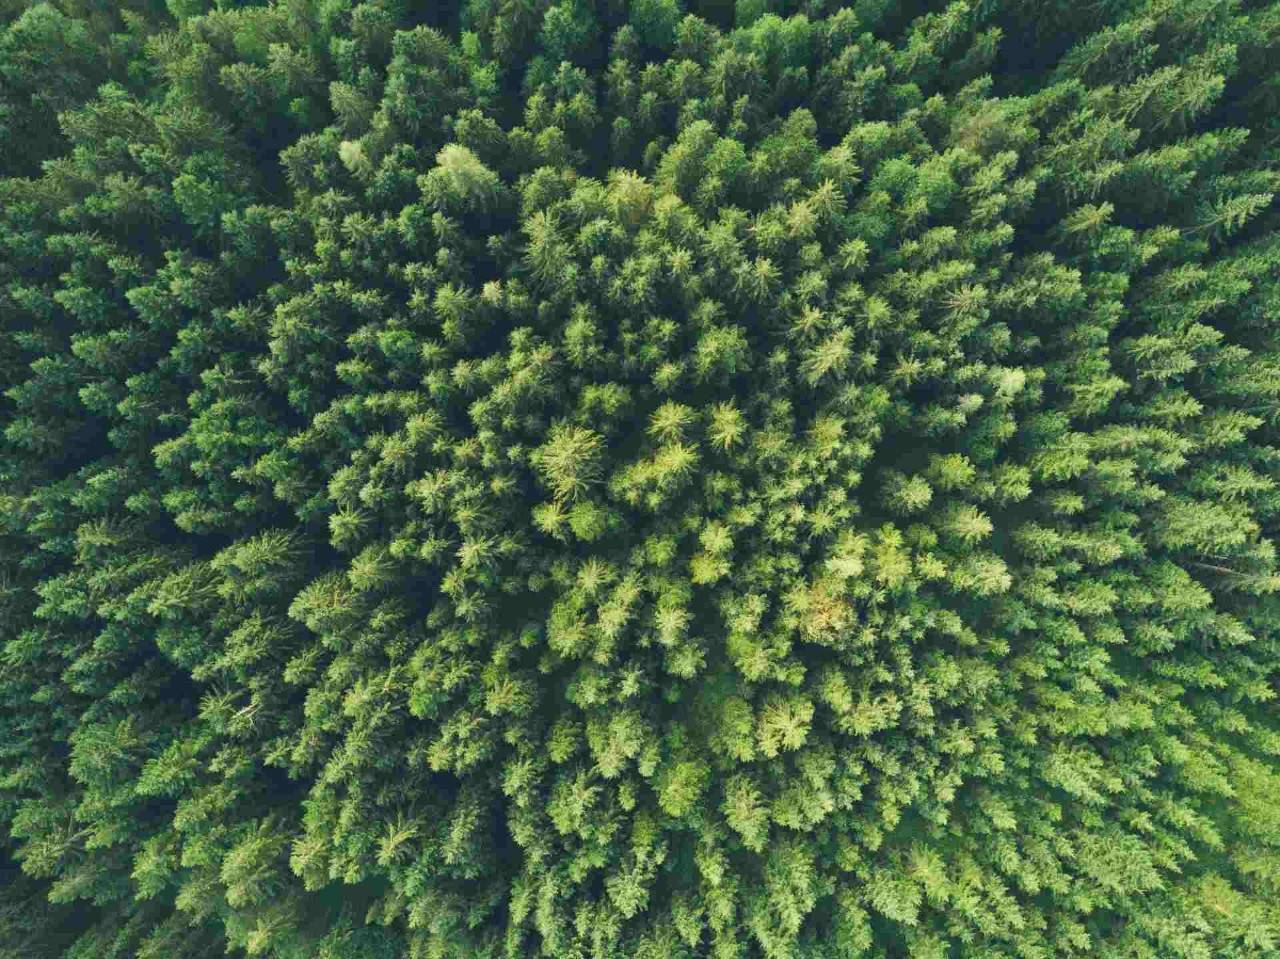 Bird's eye view of a forest